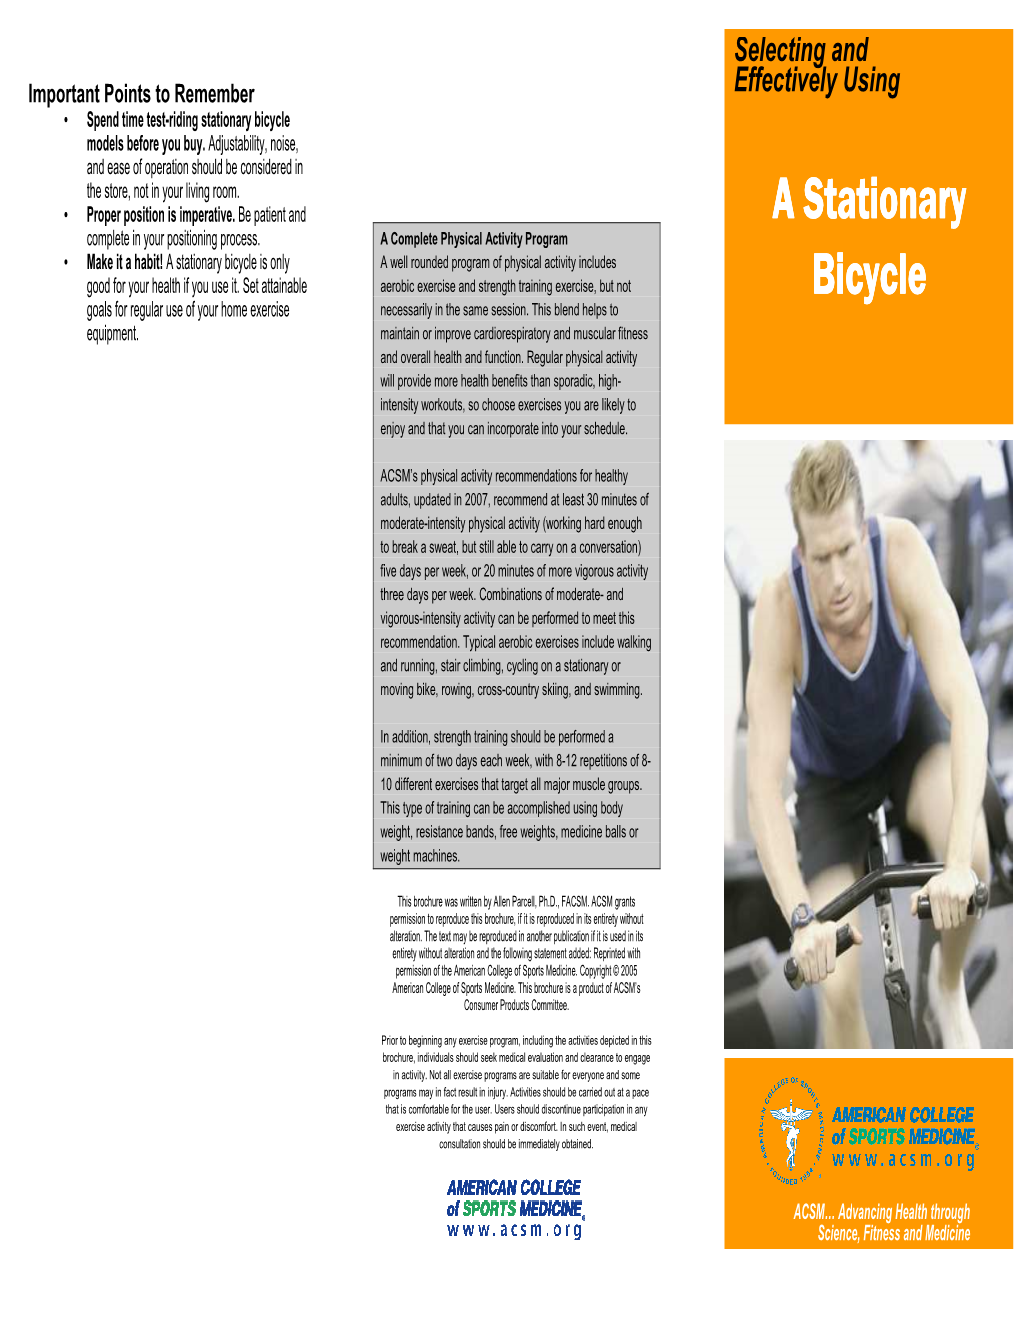 Selecting and Effectively Using a Stationary Bicycle